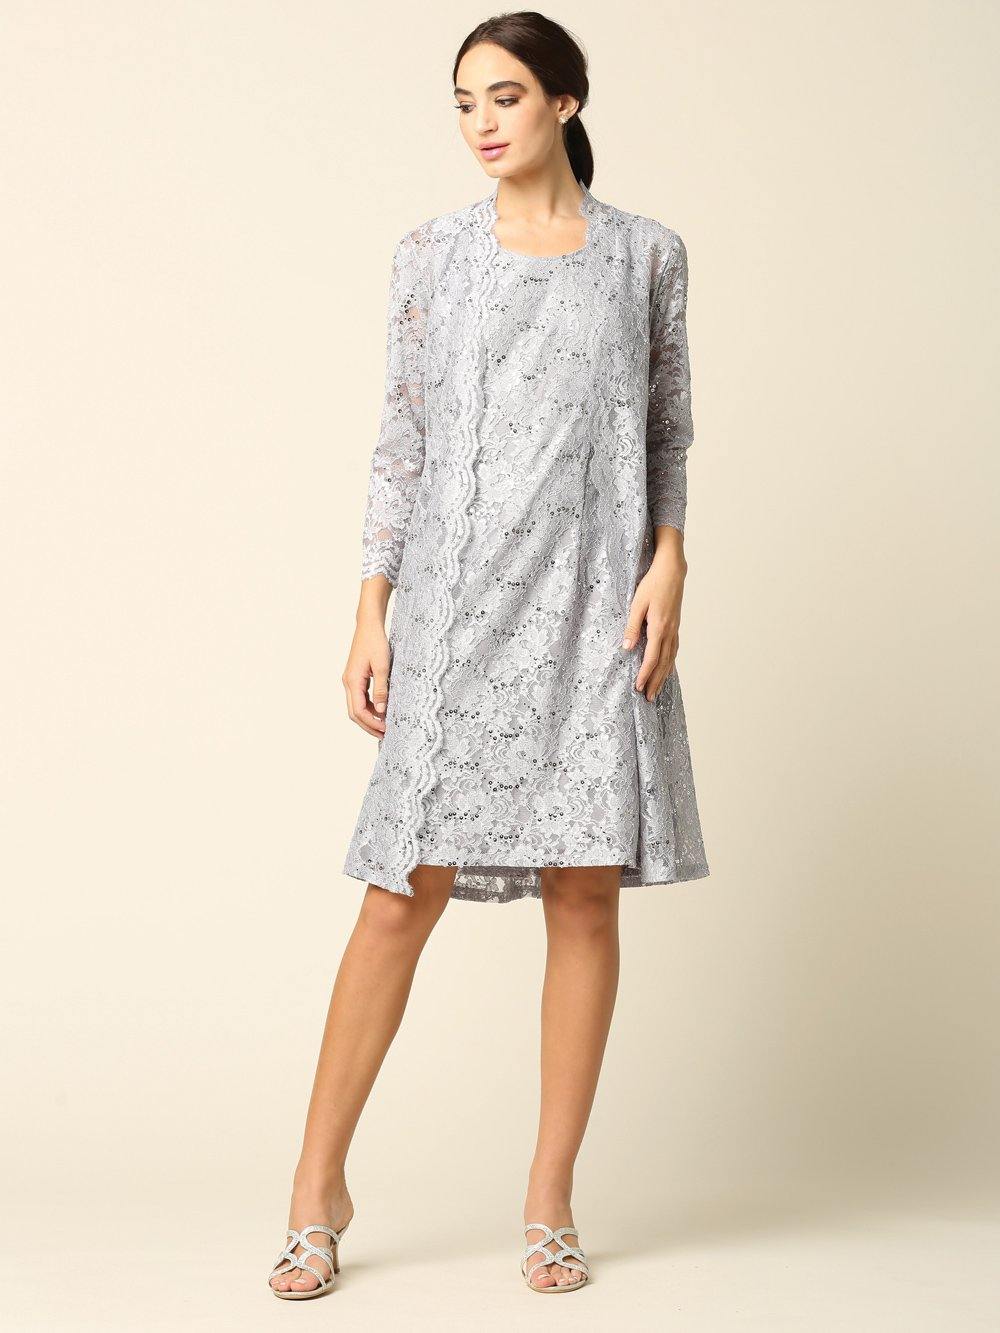 Short Mother of the Bride Lace Jacket Dress - The Dress Outlet Eva Fashion